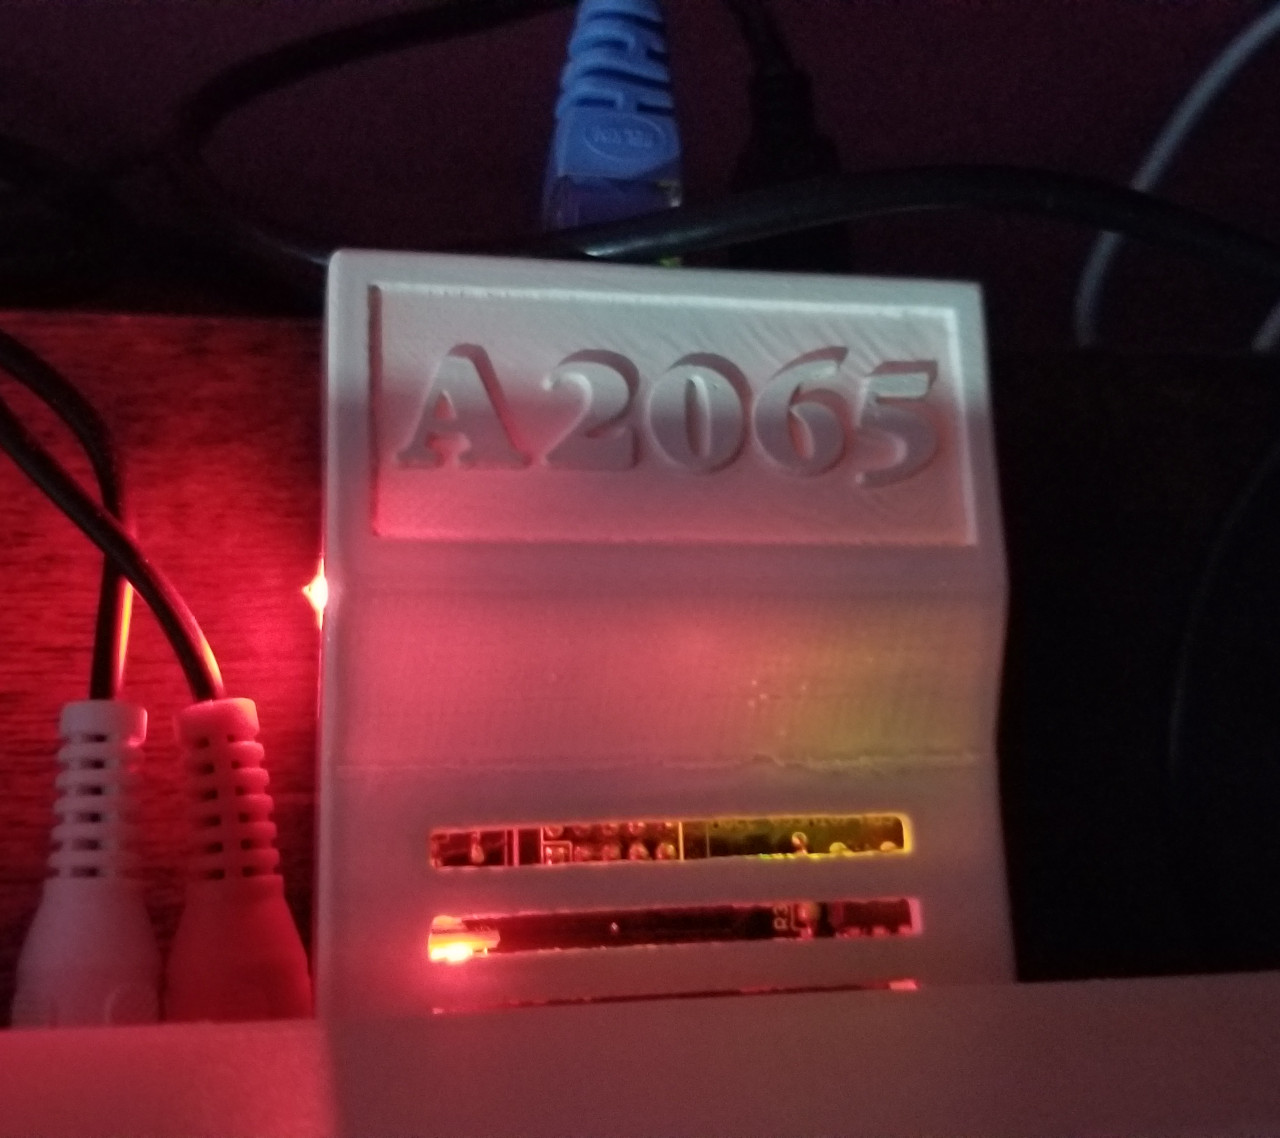 A Plipbox connected to my Amiga 1200